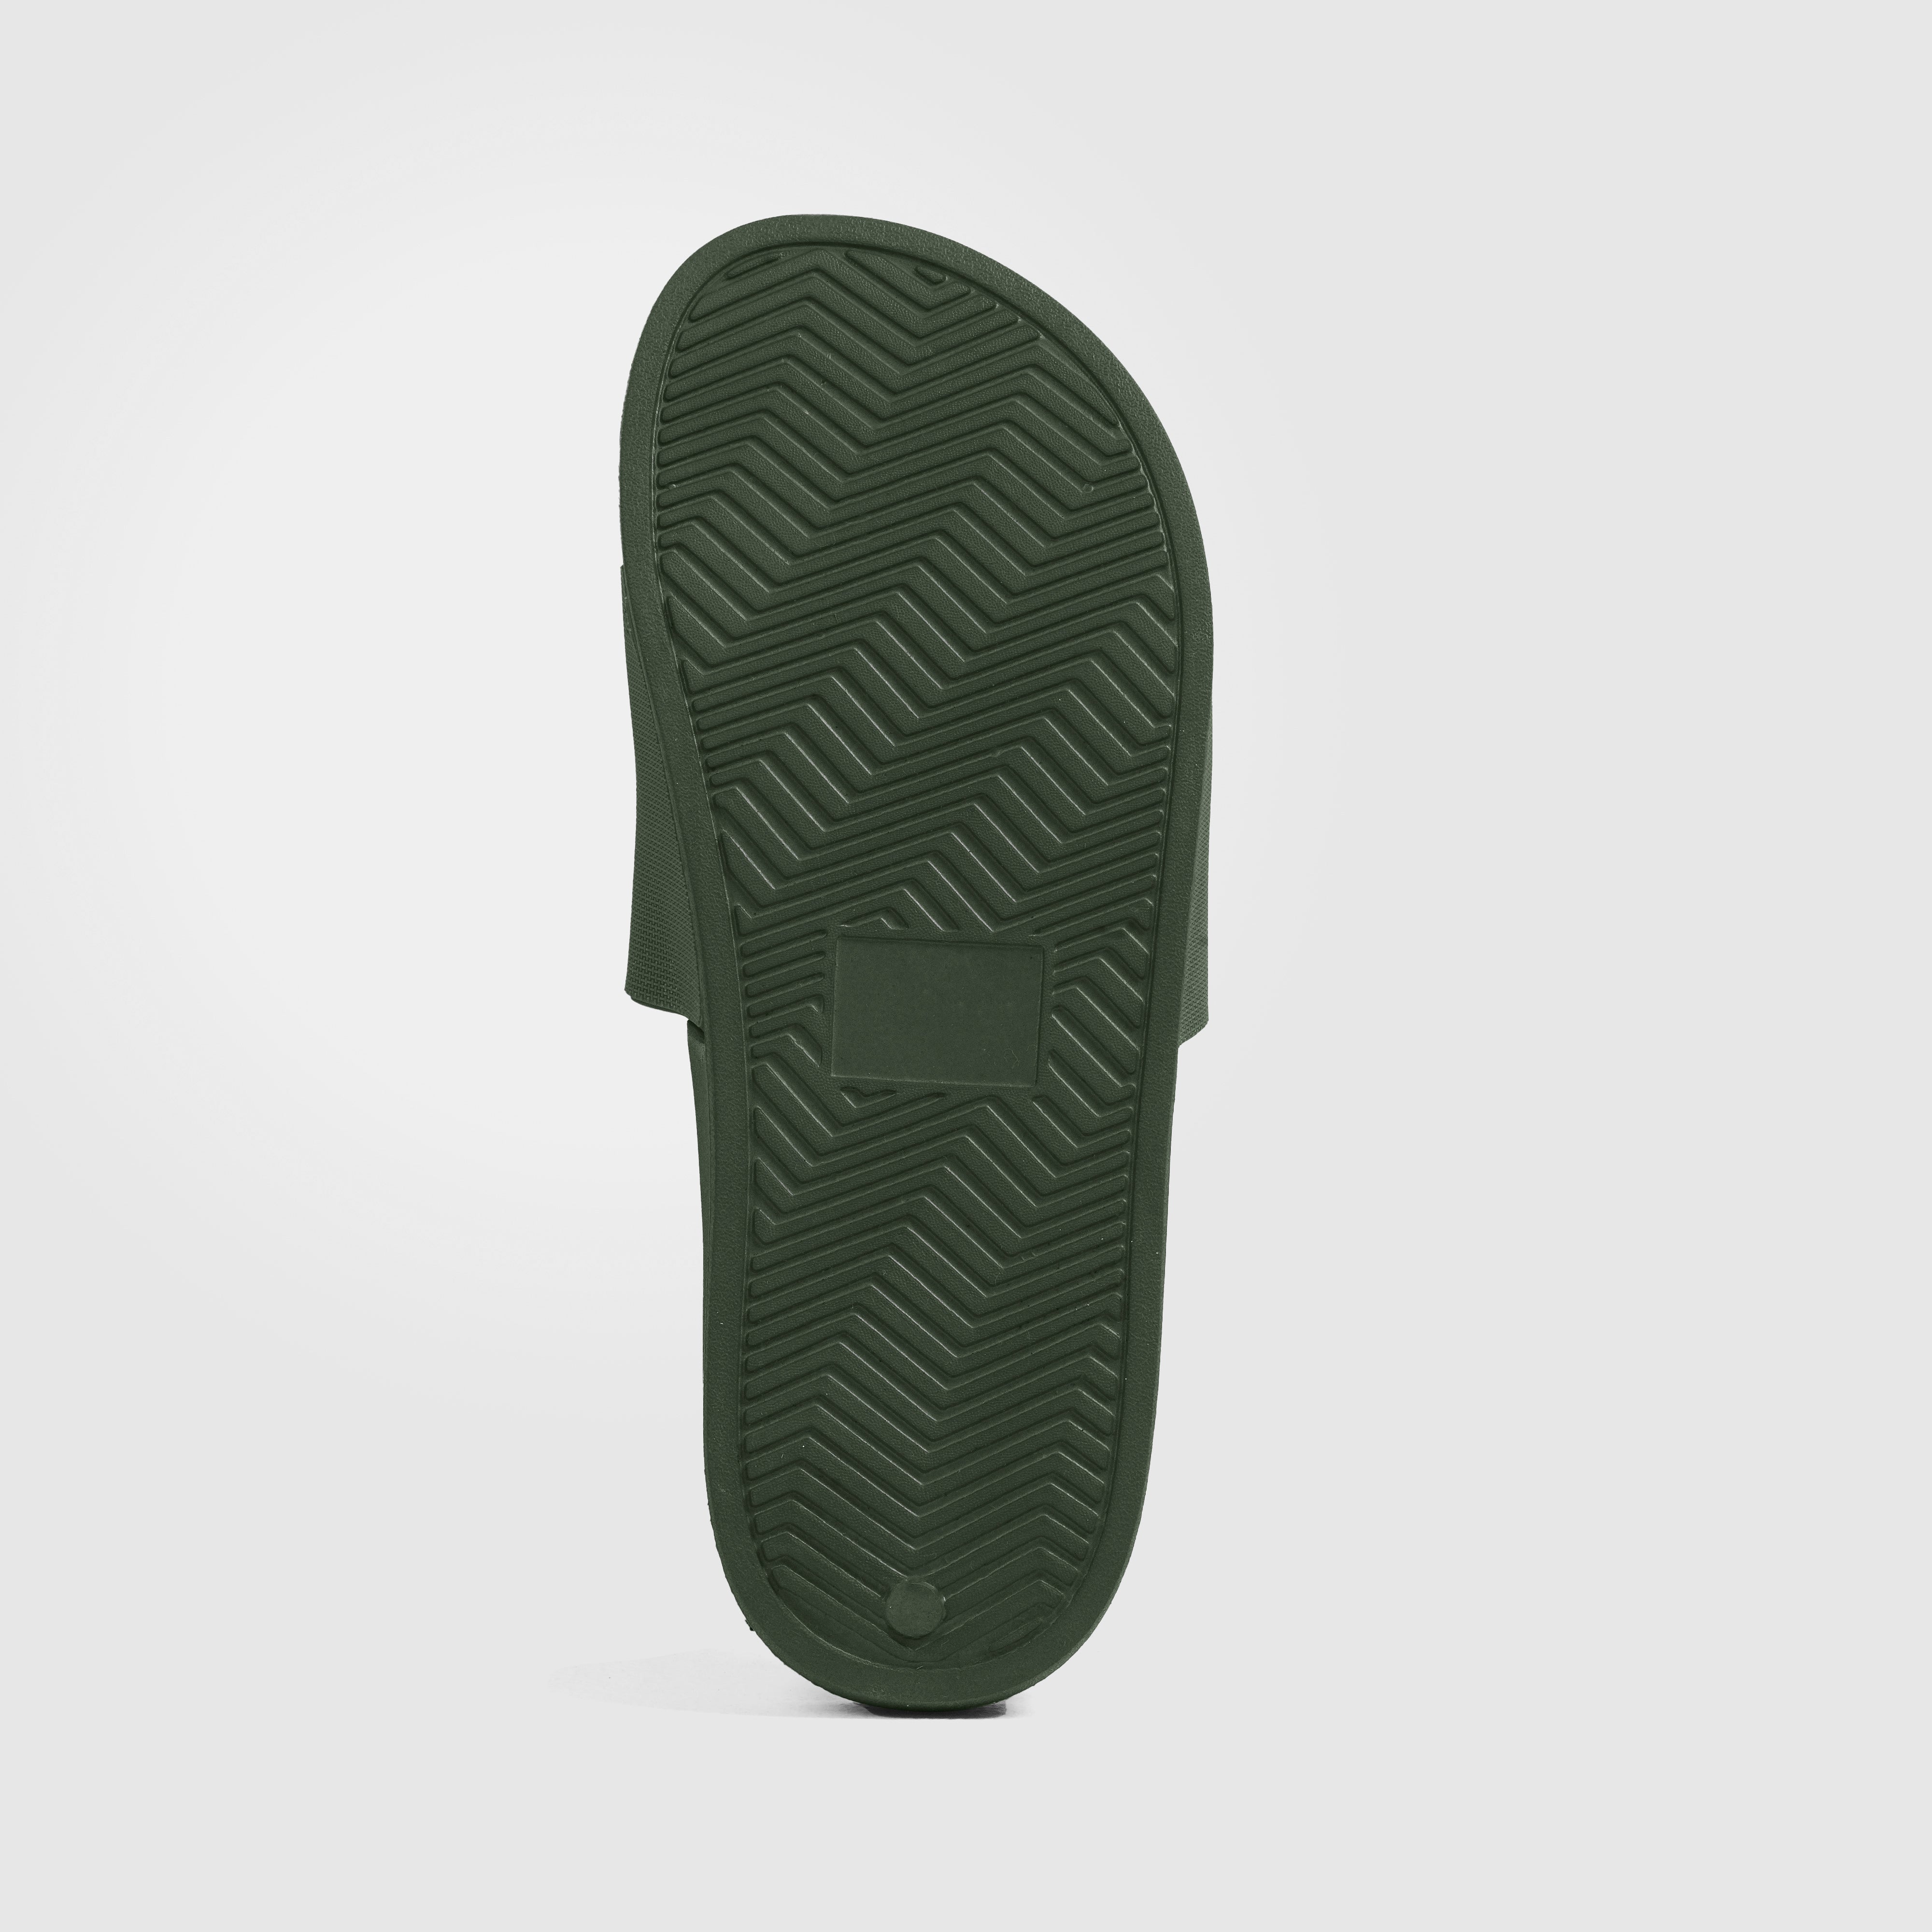 Armour Slide Slippers (Olive)